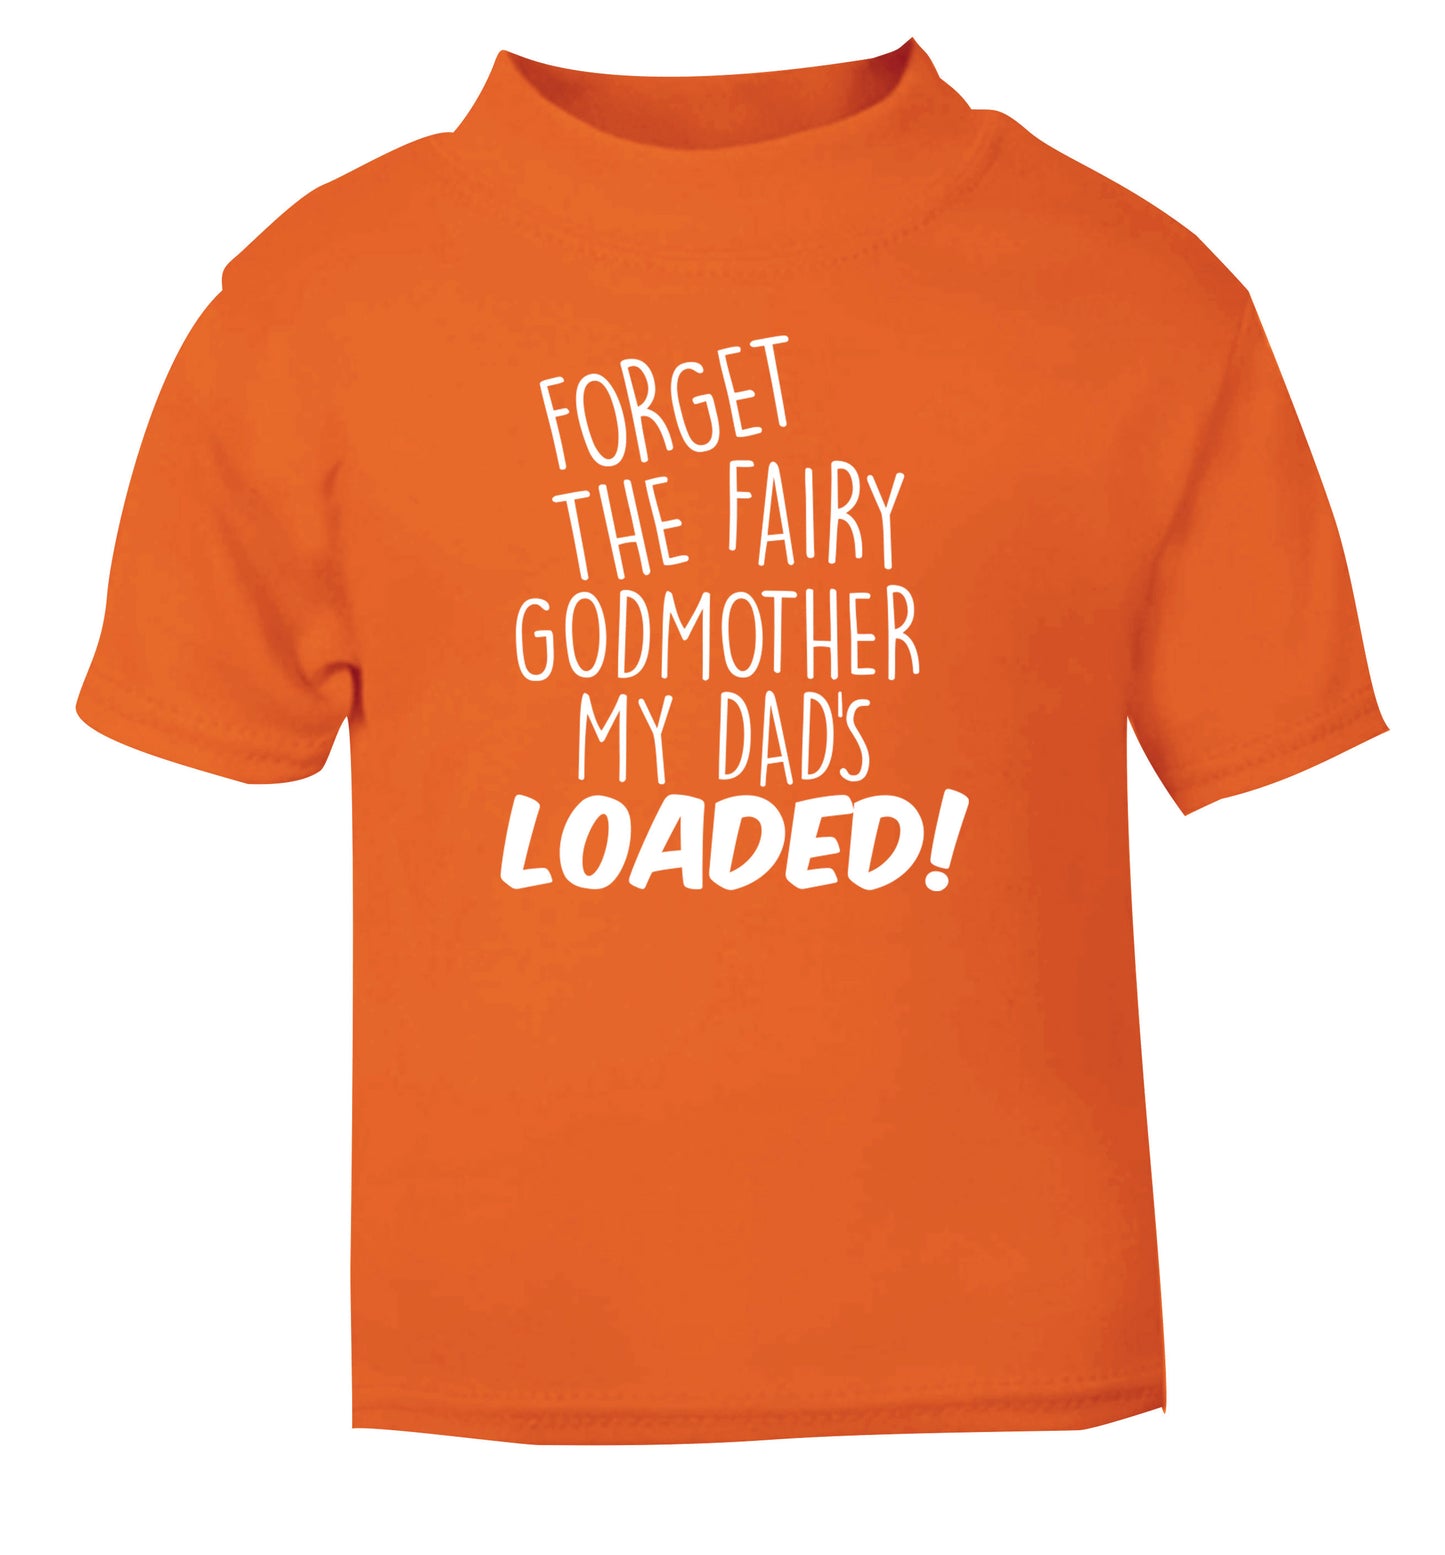 Forget the fairy godmother my dad's loaded orange Baby Toddler Tshirt 2 Years